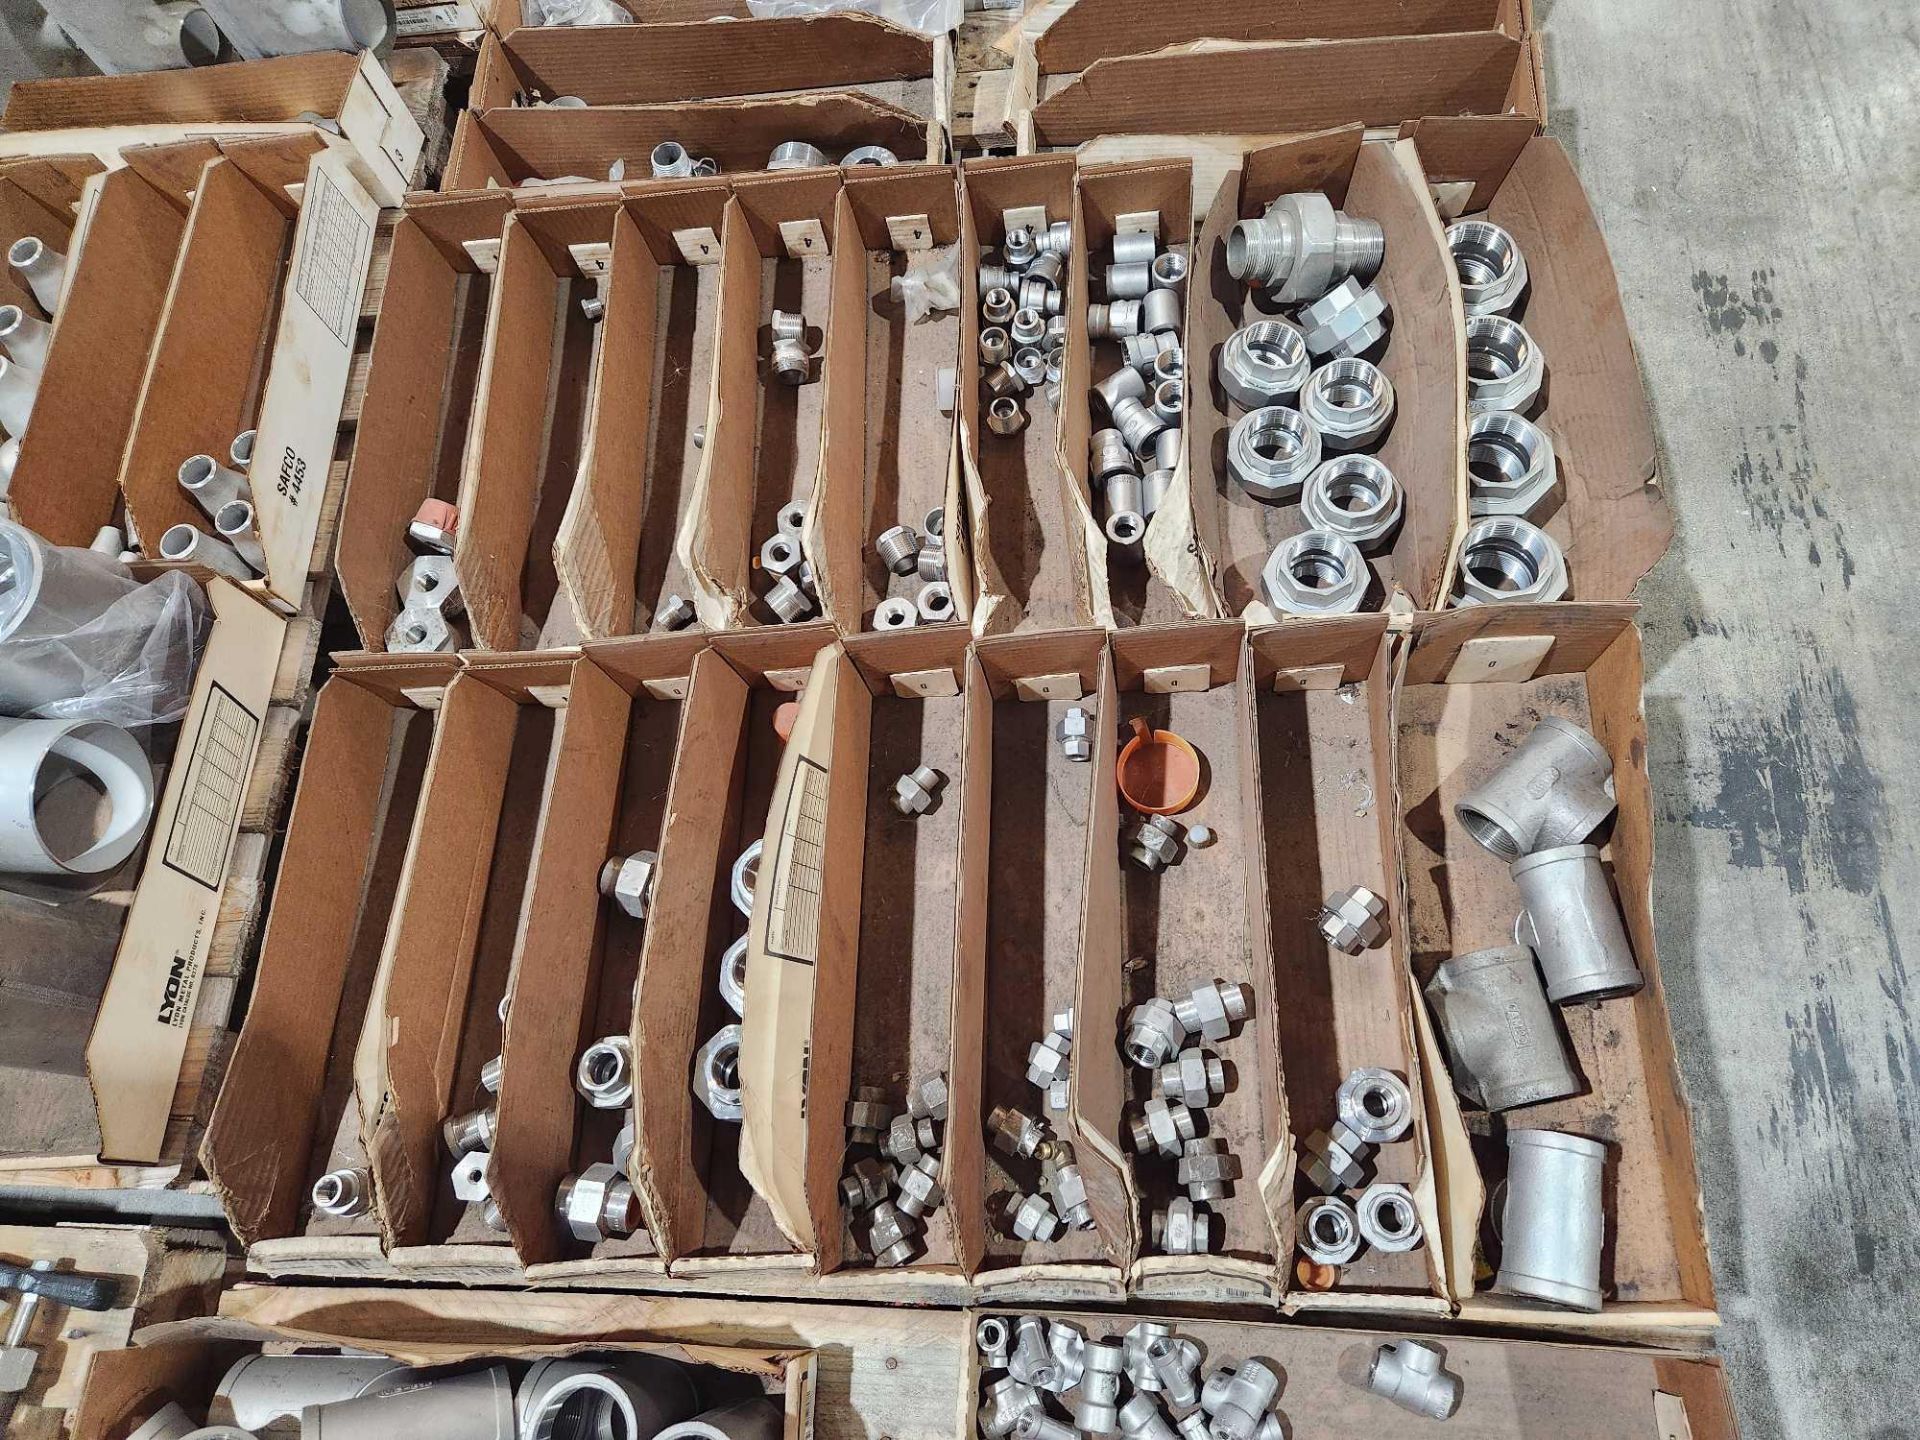 Lot asst stainless steel fittings, connectors, adapters, etc. (SORTED BY SIZE IN CARDBOARD BOXES), - Image 7 of 8